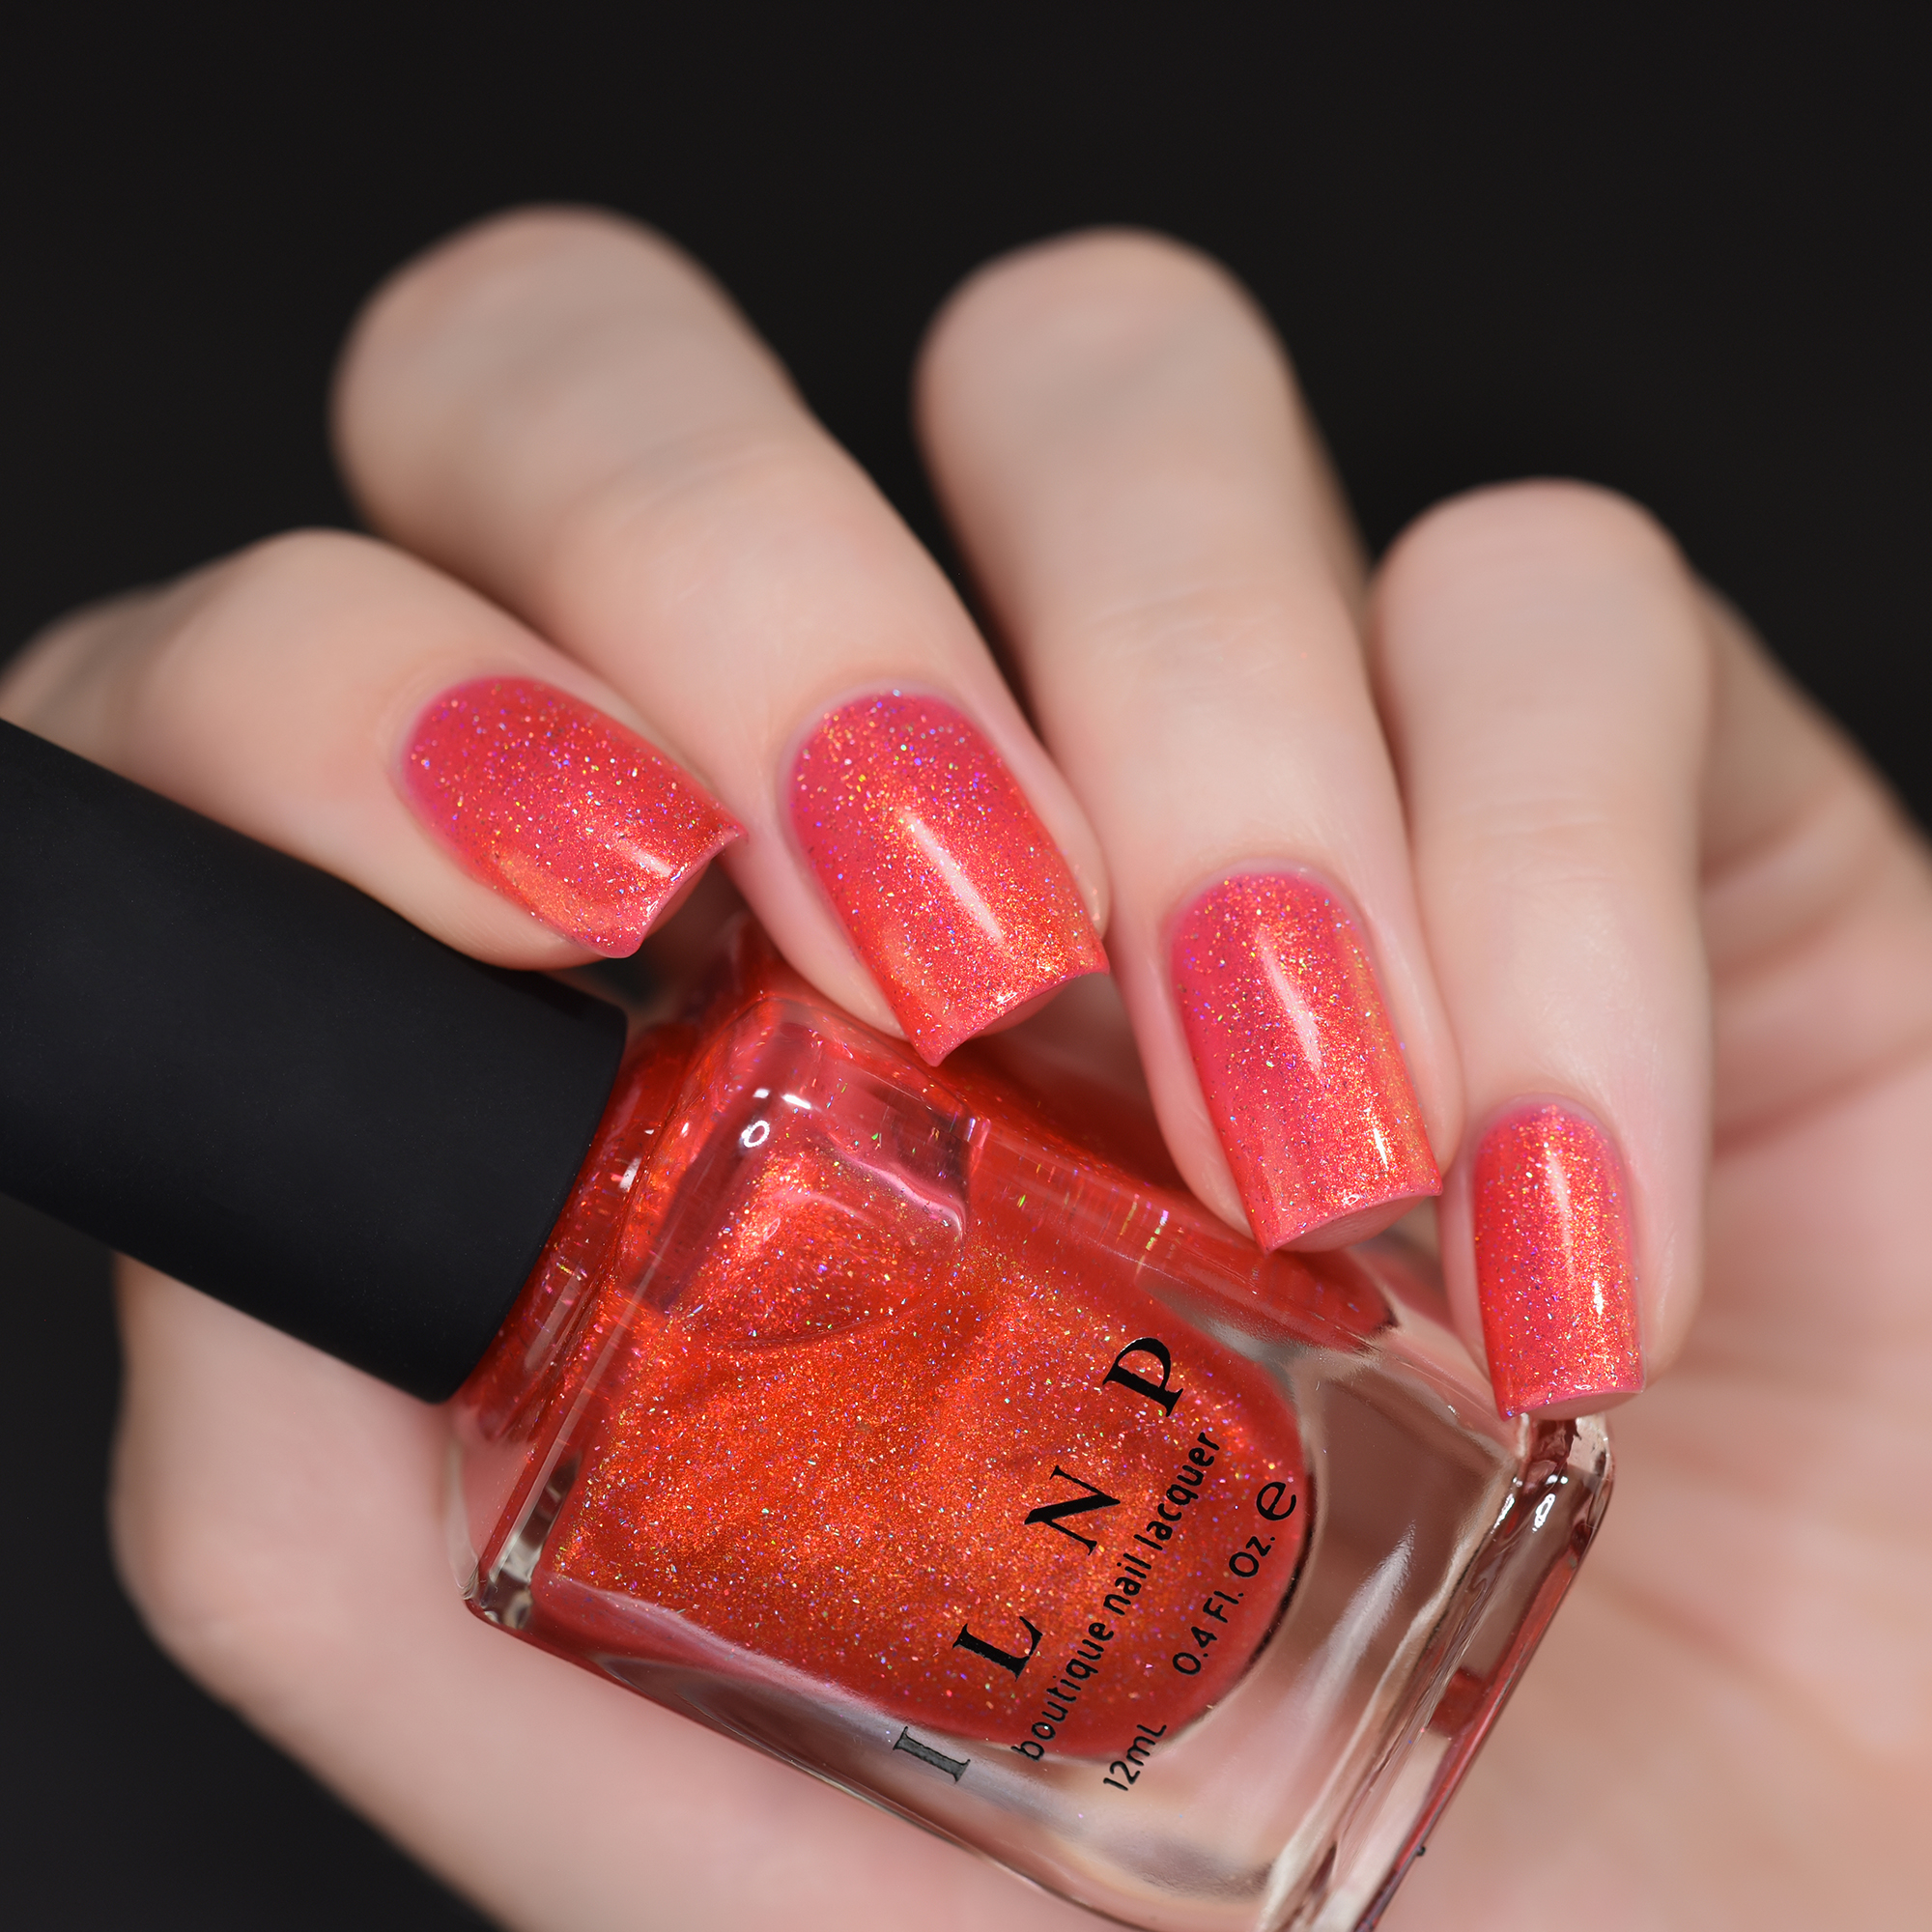 On Location - Orange Coral Holographic Nail Polish by ILNP